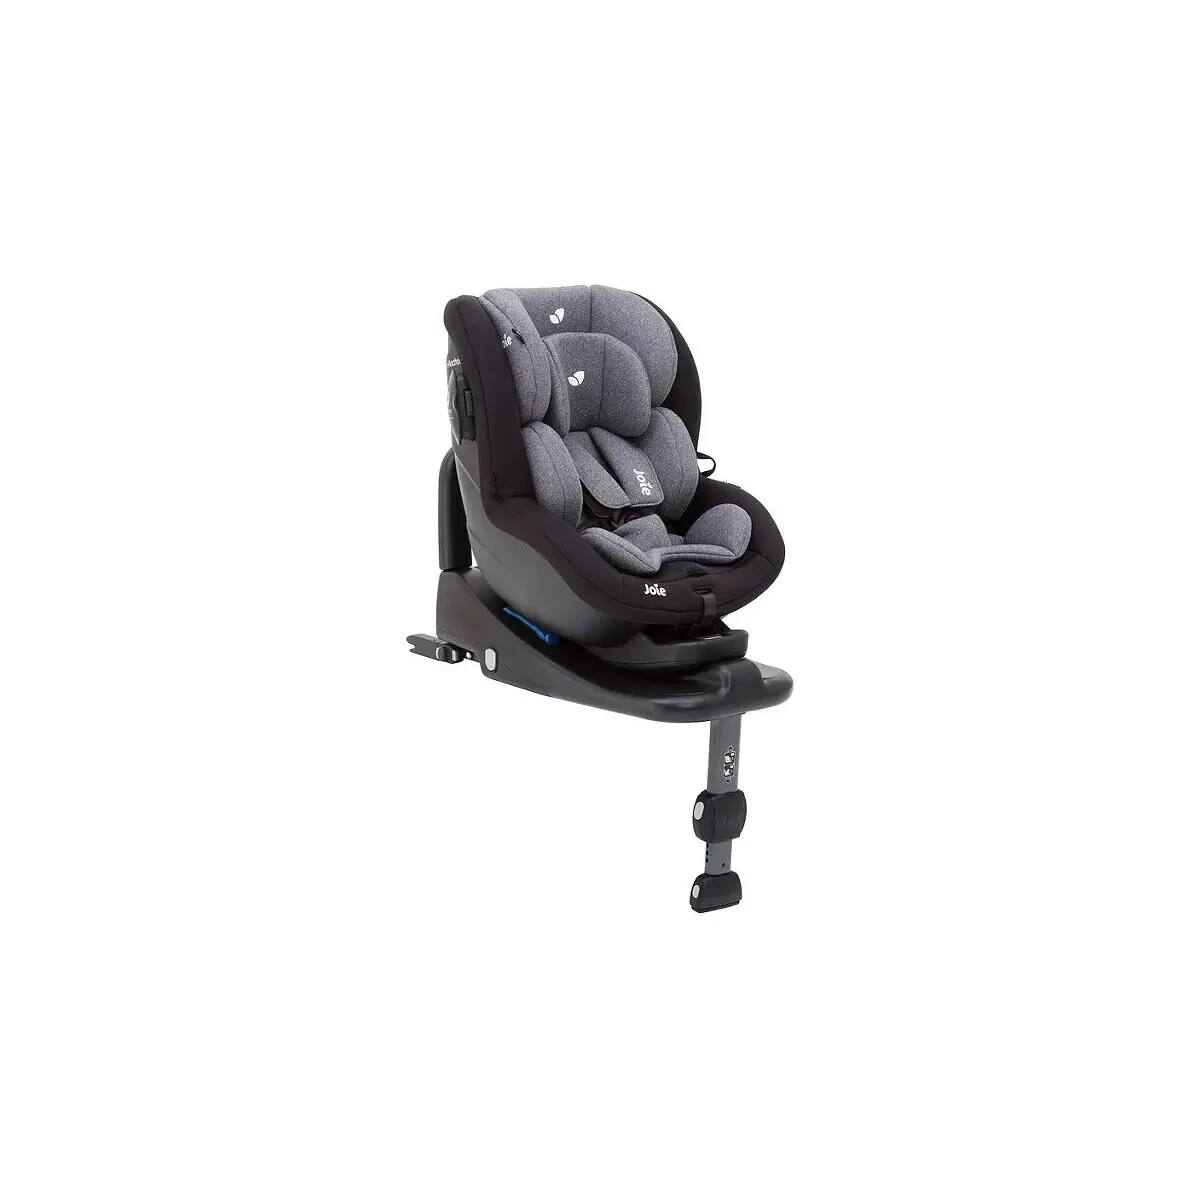 Joie i-Anchor Advance Group 0+/1 Car Seat